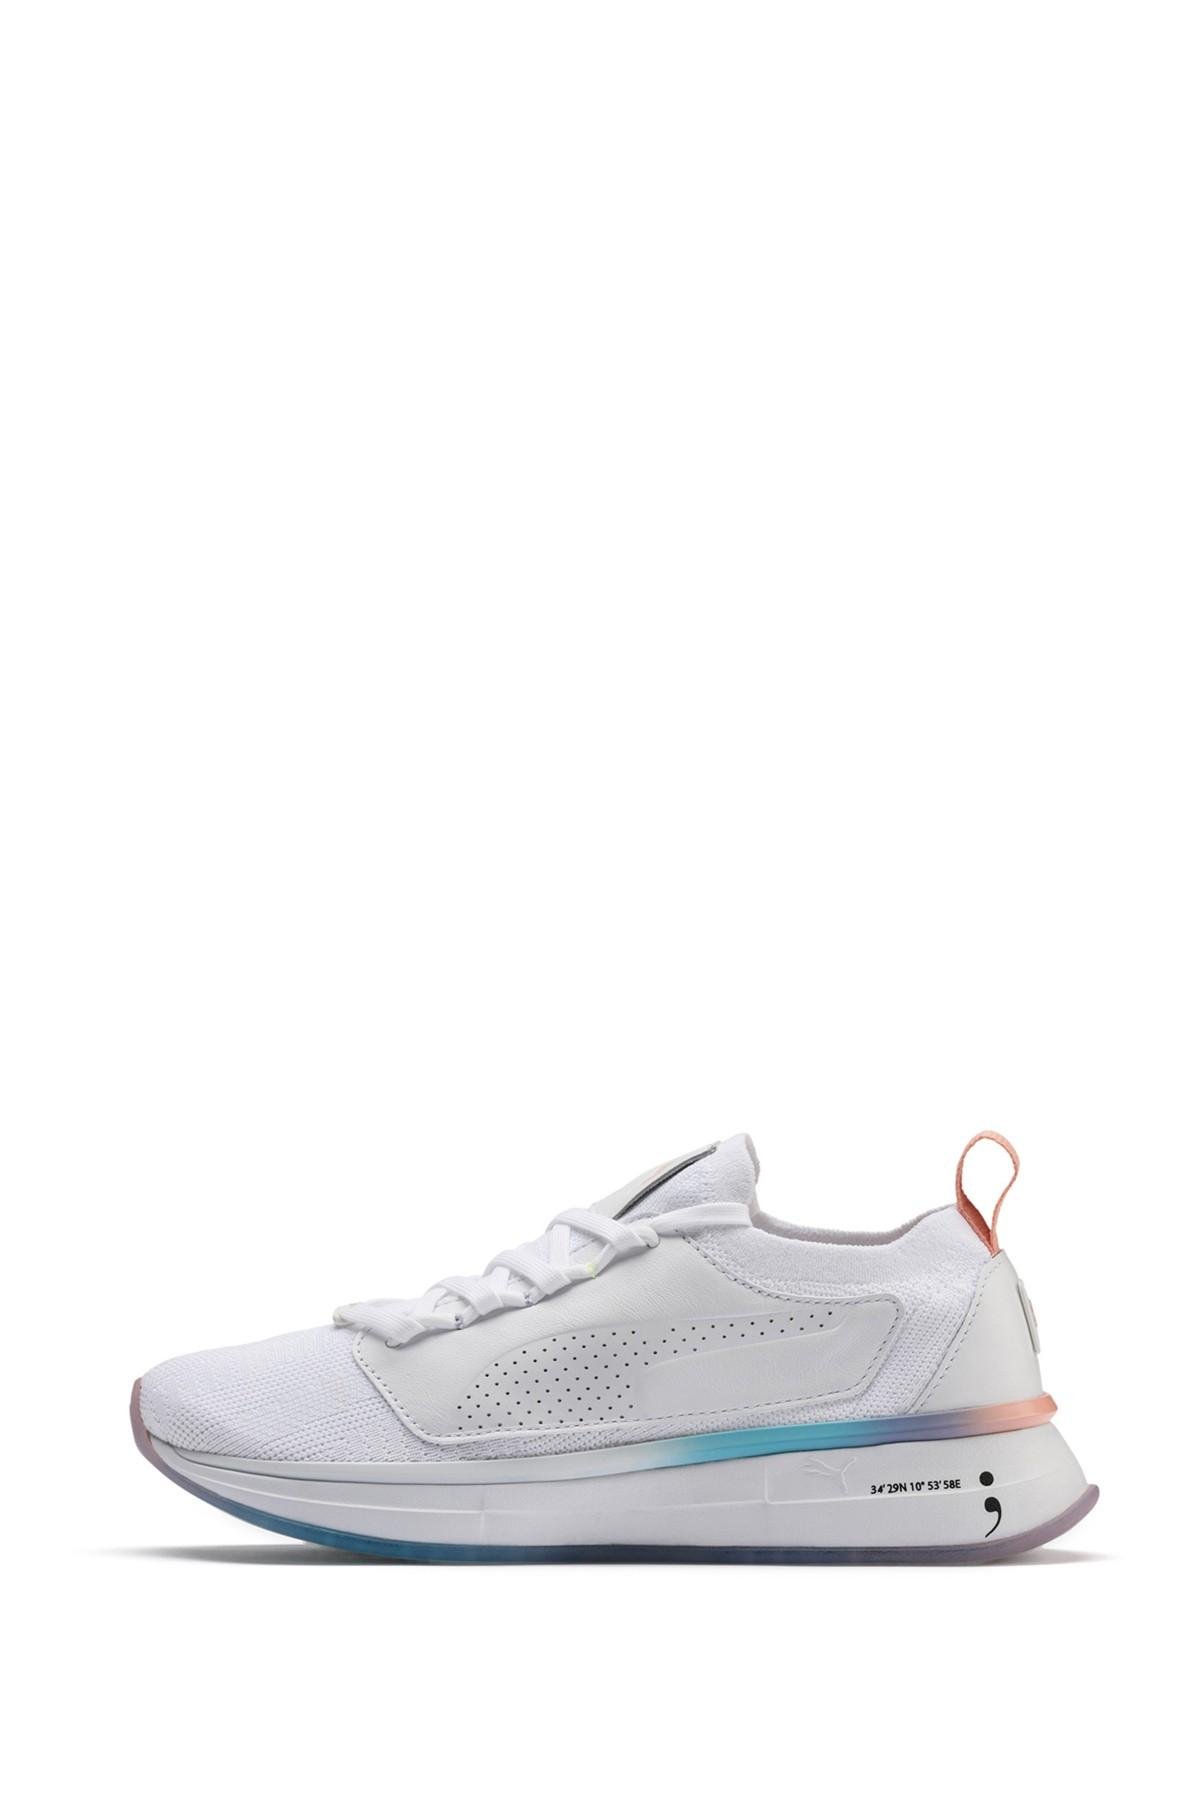 PUMA Synthetic Sg Runner Ice Trainer in White - Lyst